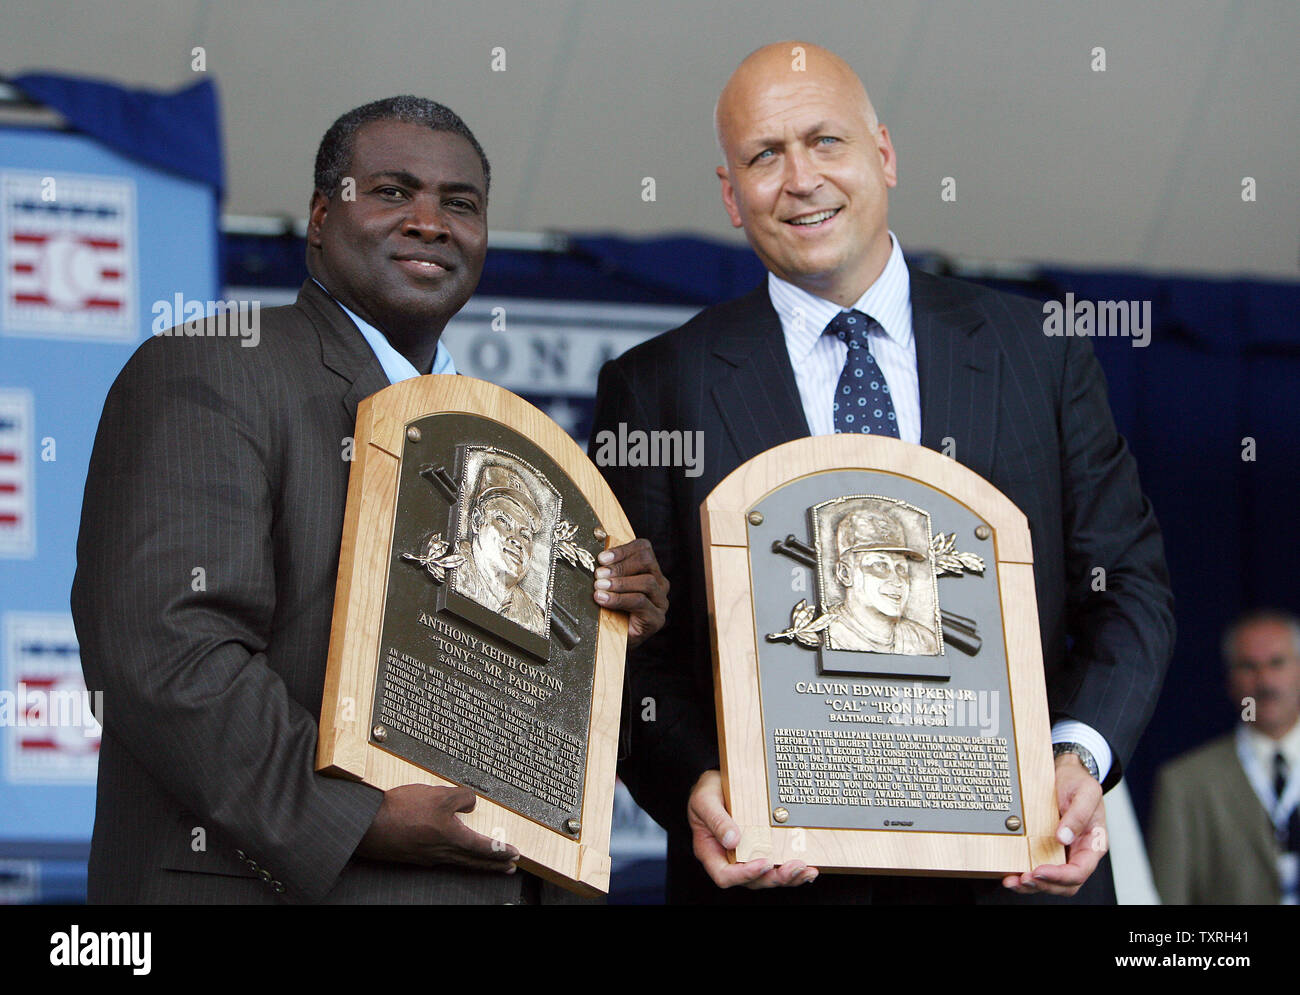 Ripken and Gwynn Enter Hall of Fame - The New York Times